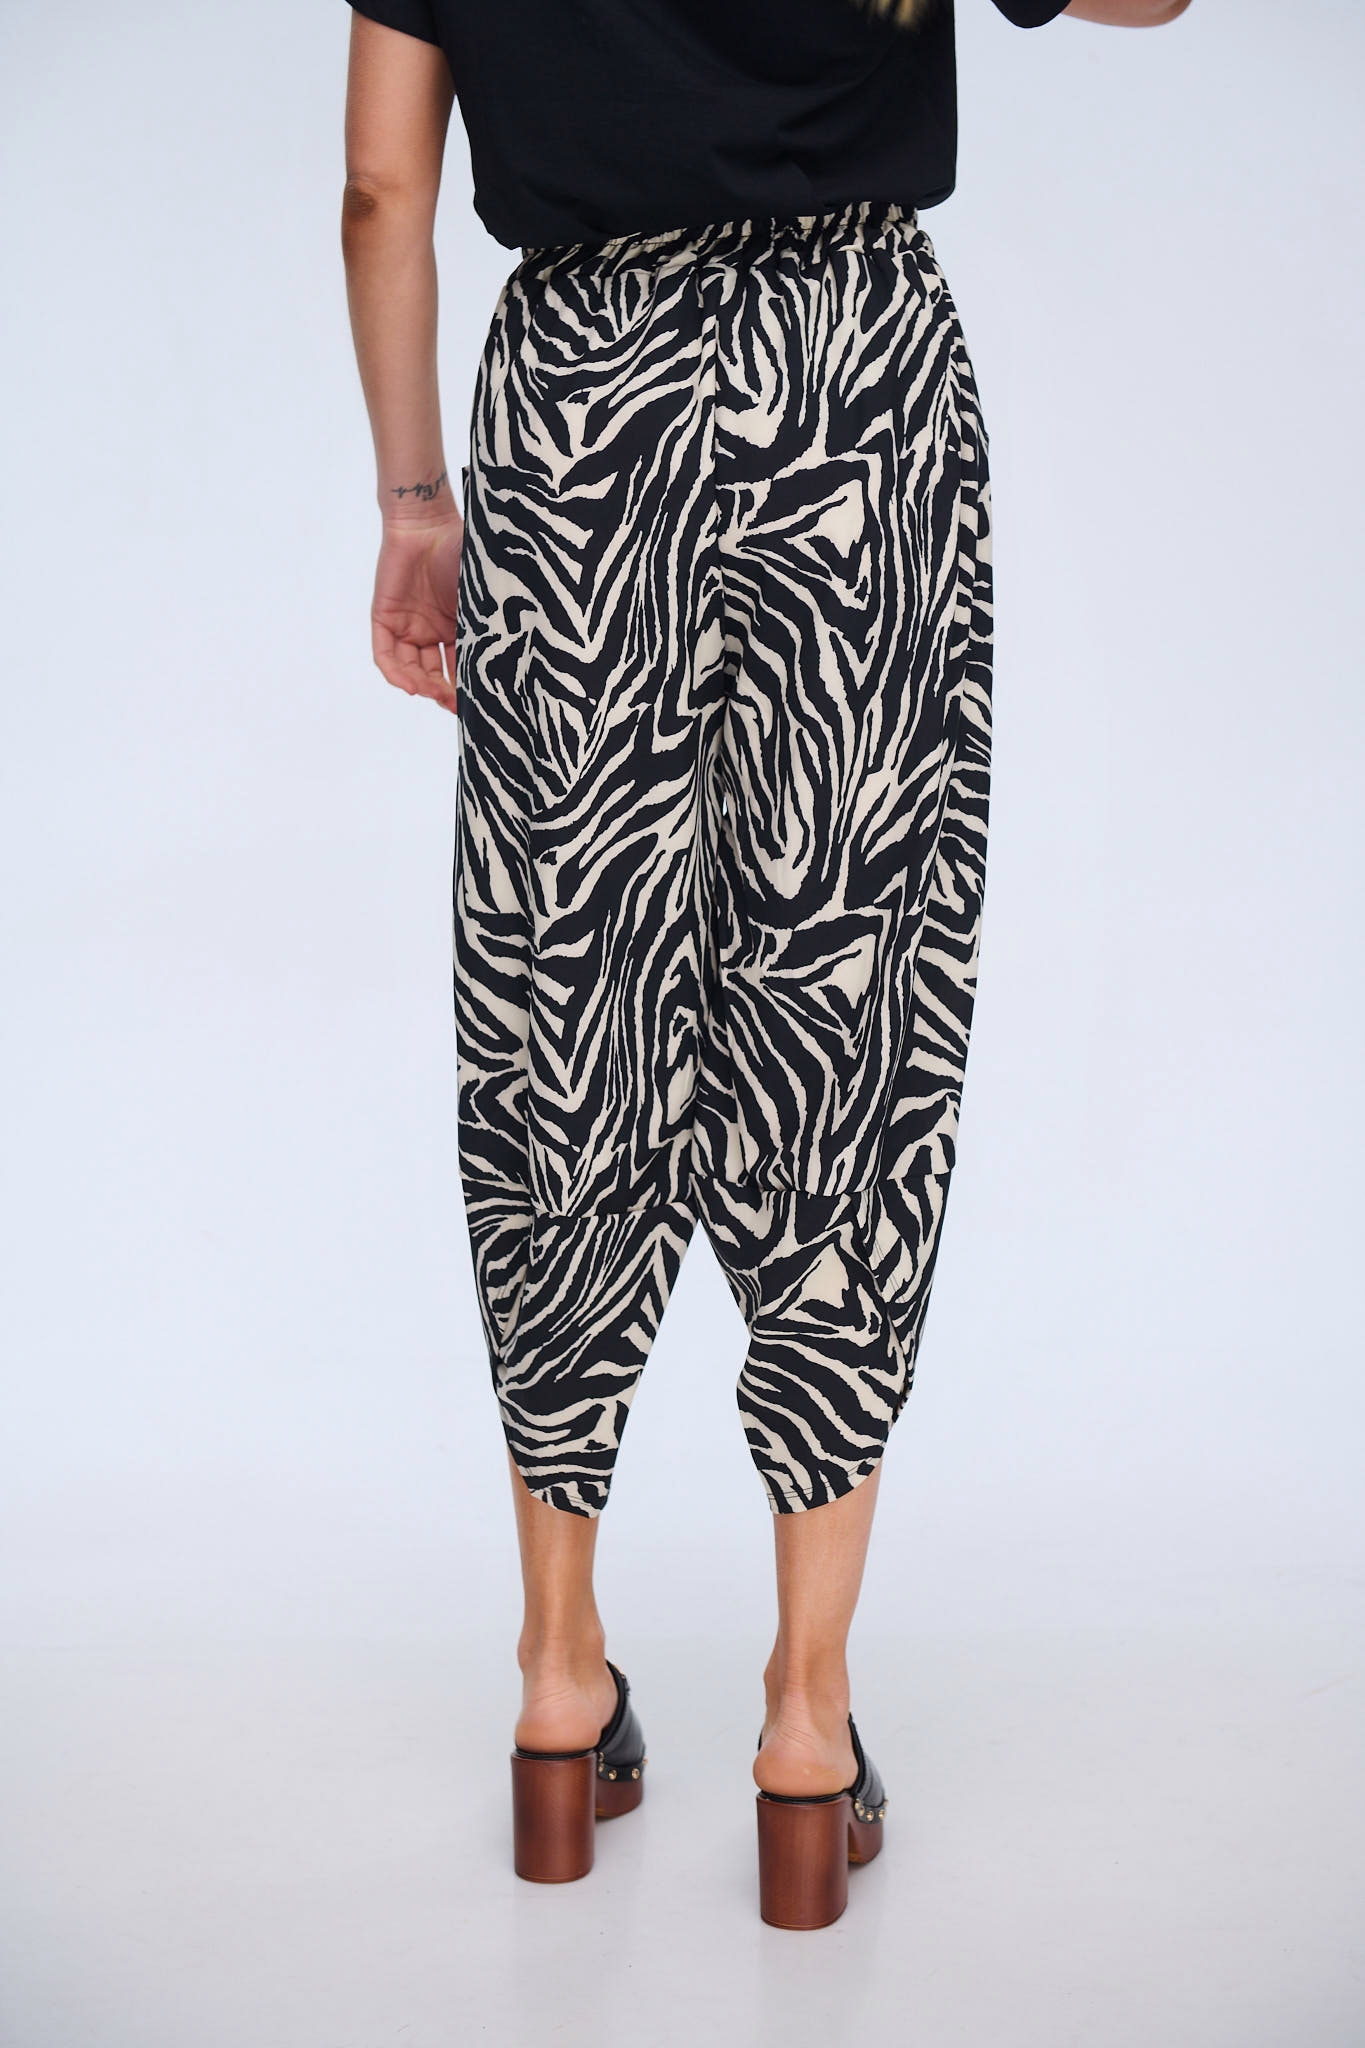 Baggy Zebra Printed Pants With Pockets